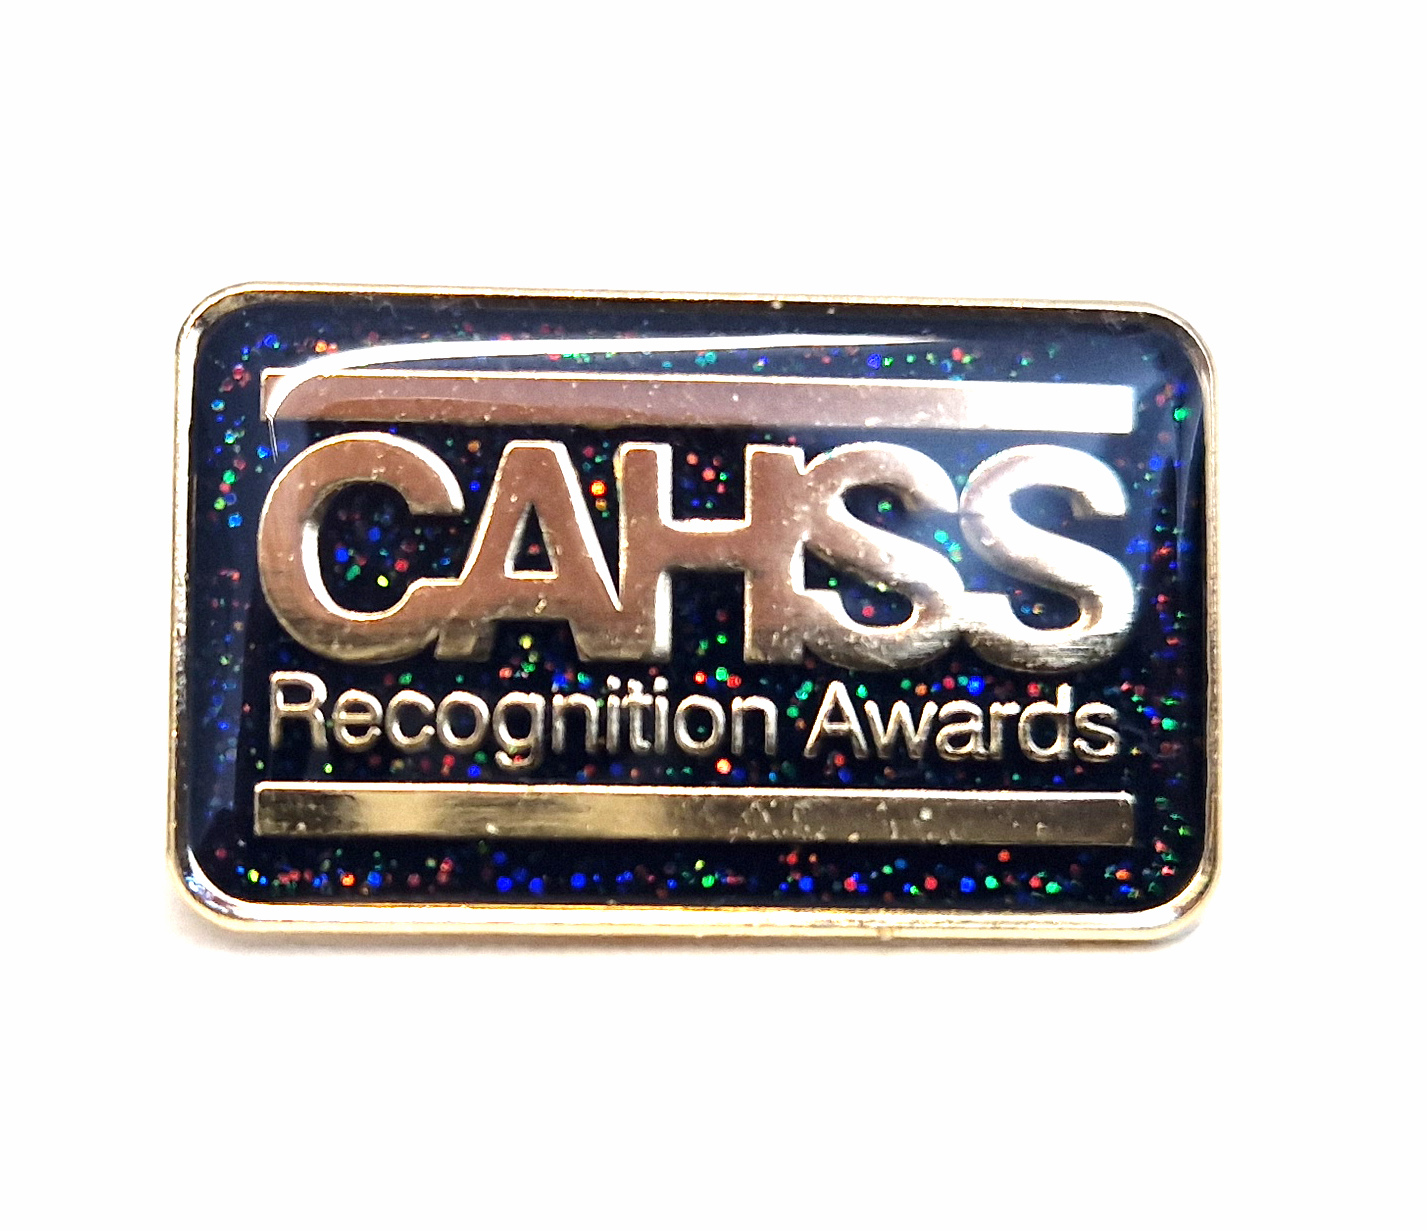 CAHSS Recognition Awards